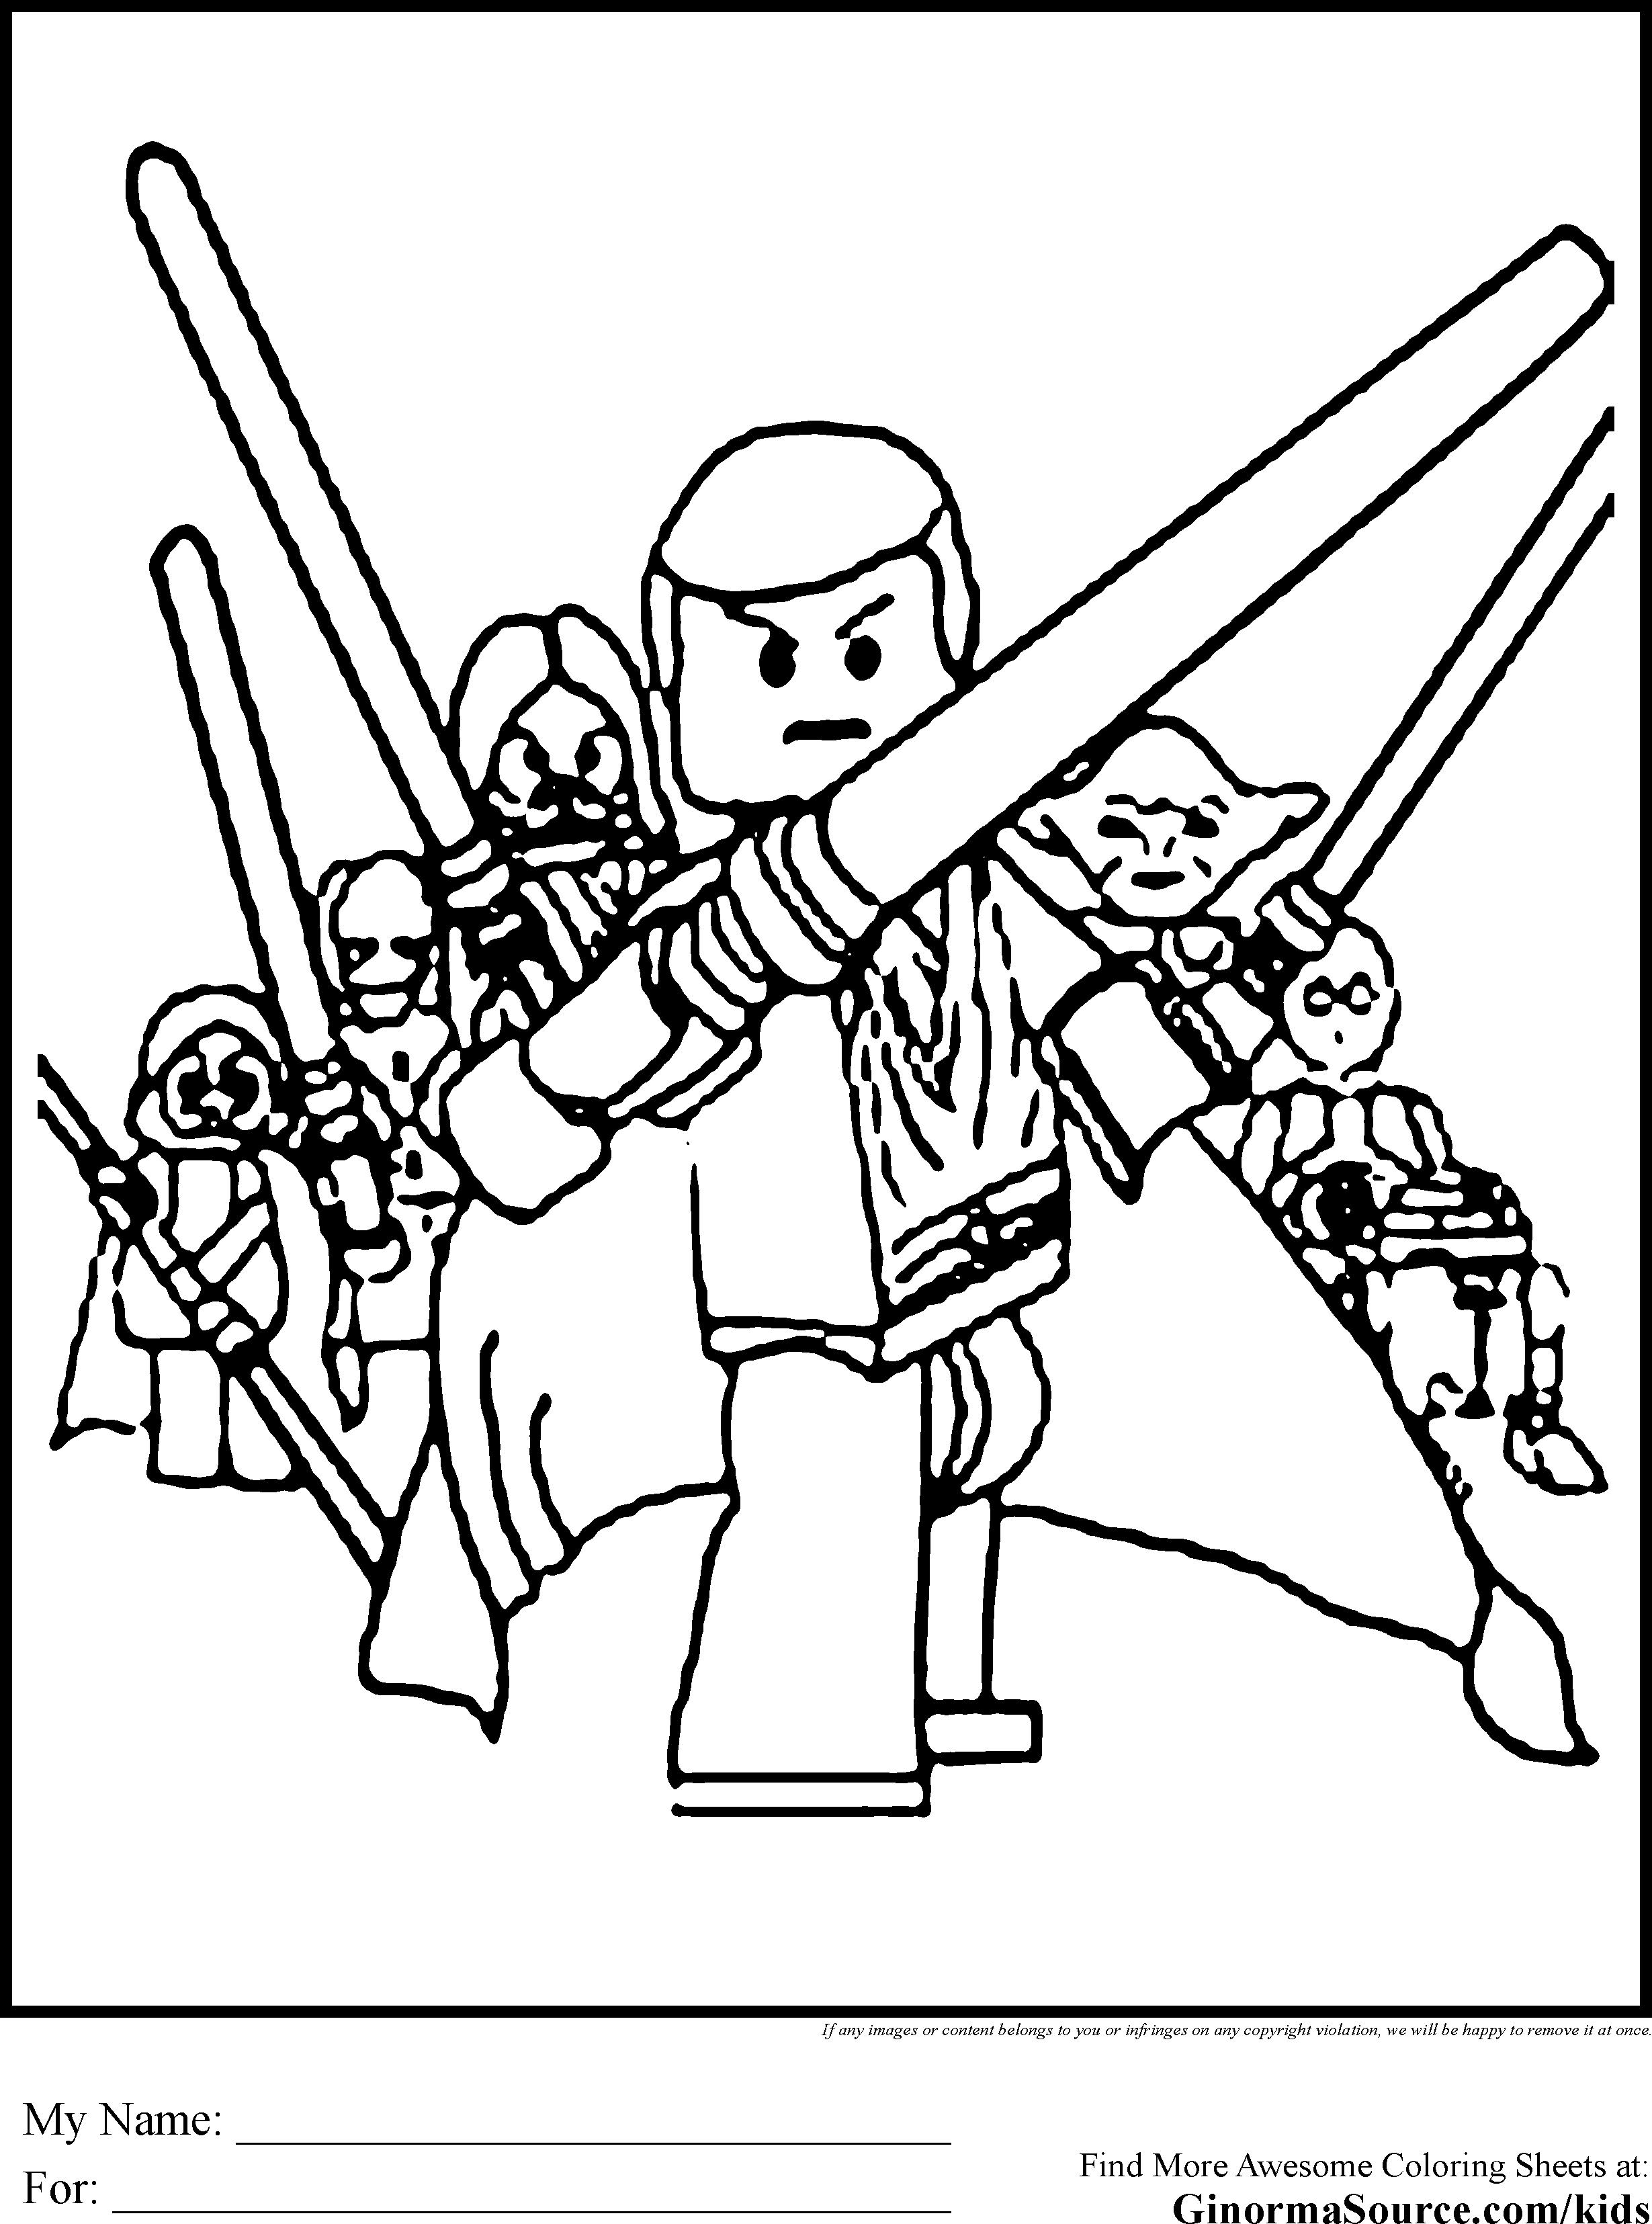 colouring pages lego star wars mundo lego star wars coloring book pages wars colouring star lego 